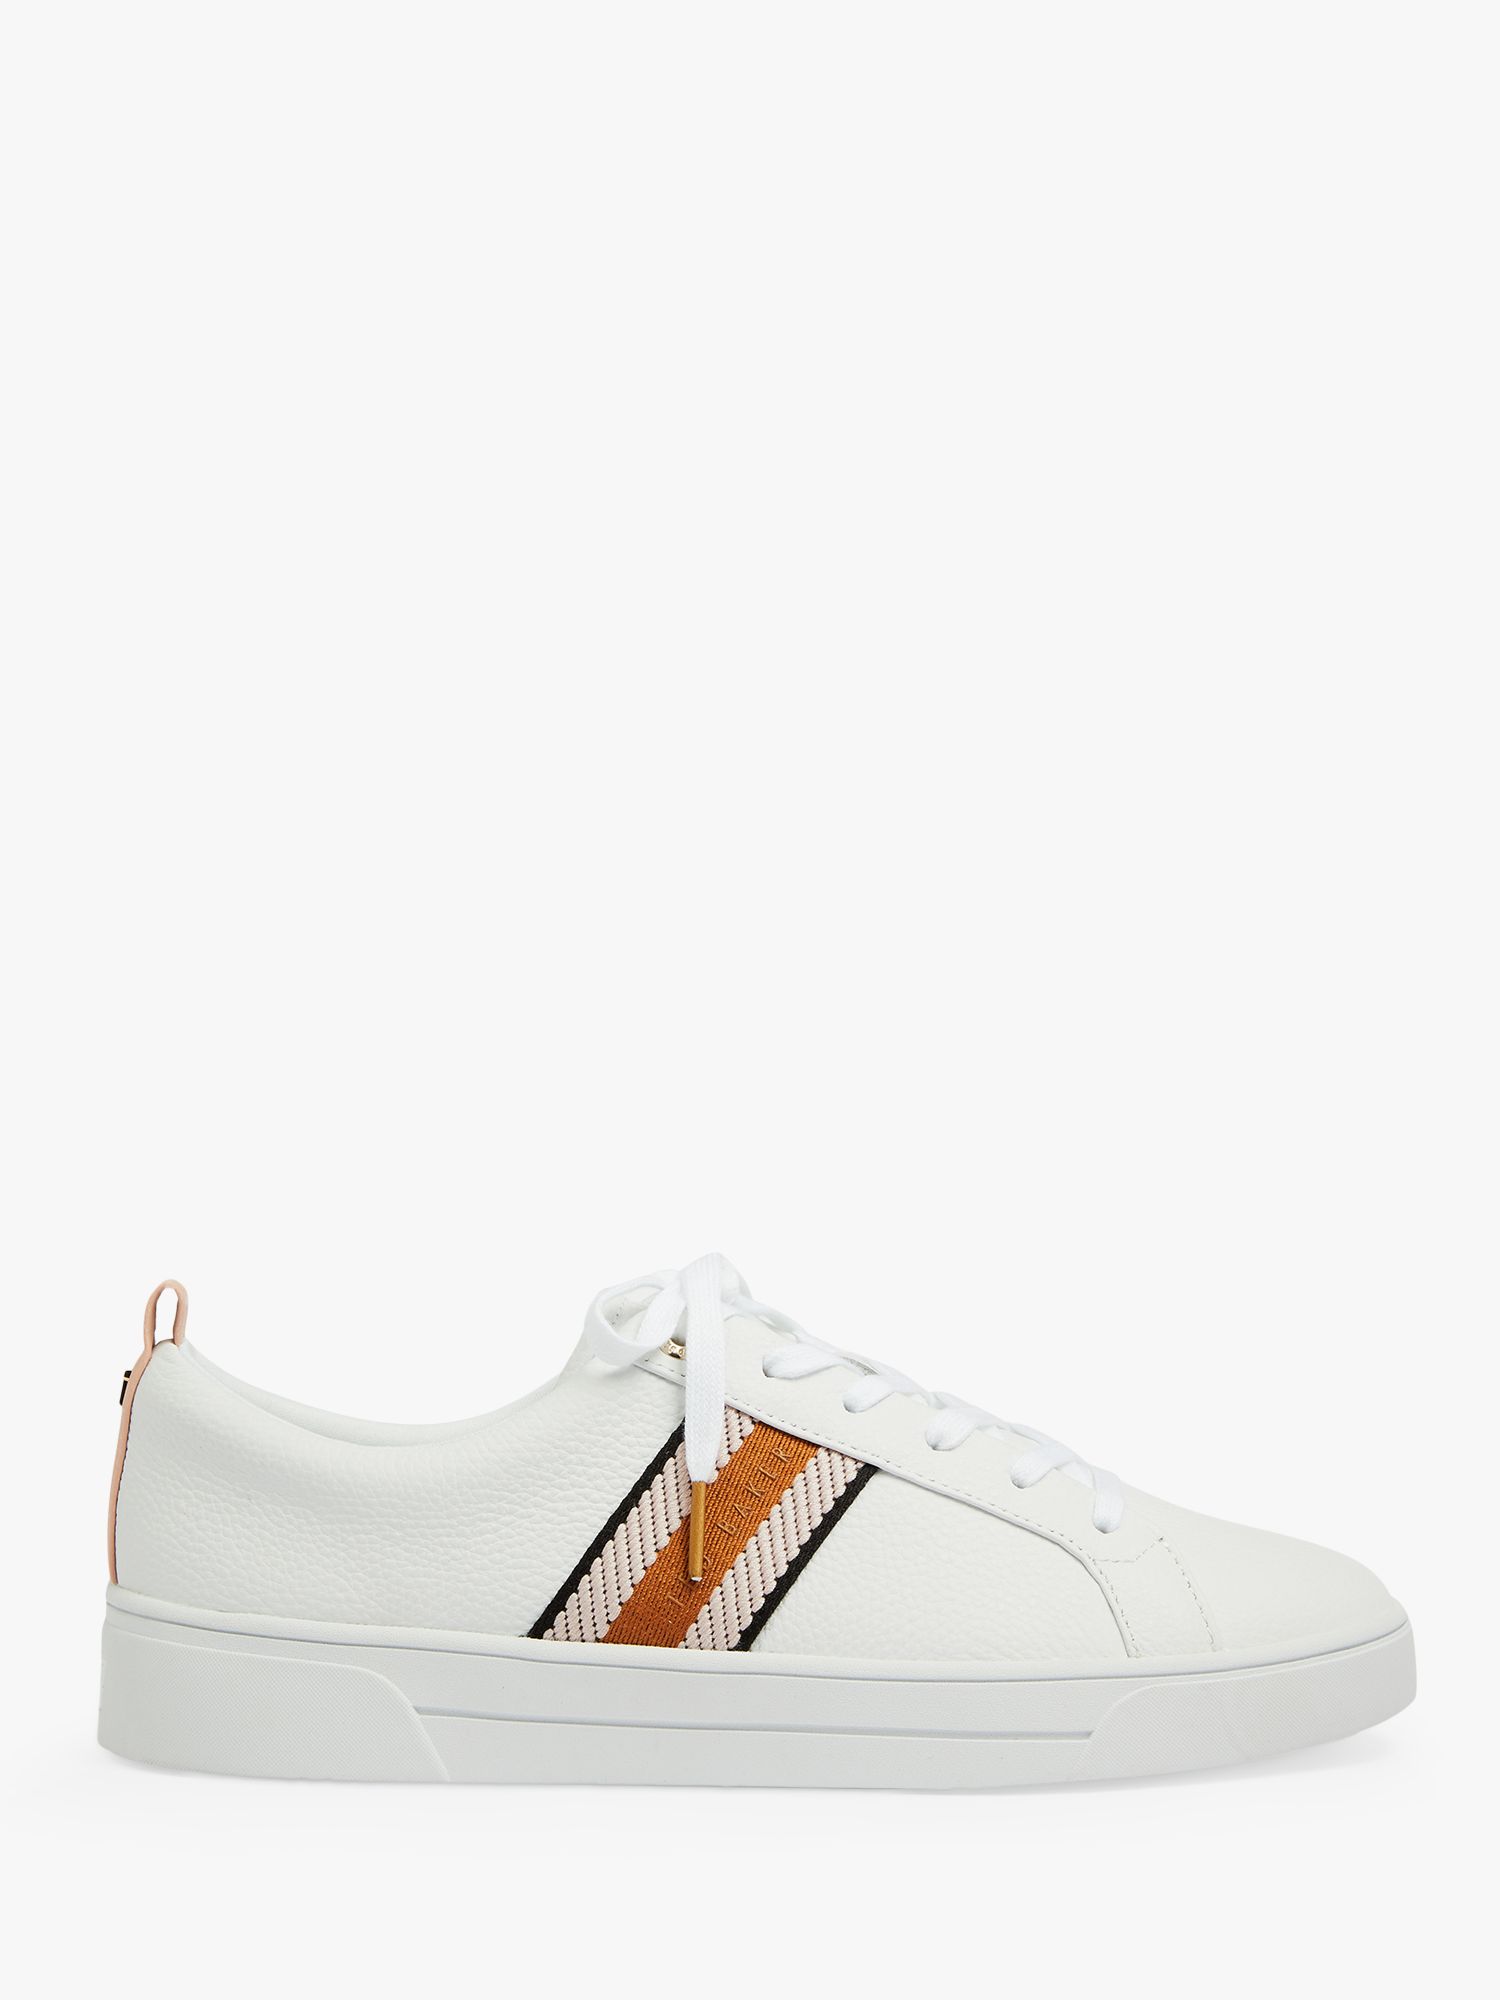 Ted Baker Baily Trainers, White/Multi at John Lewis & Partners